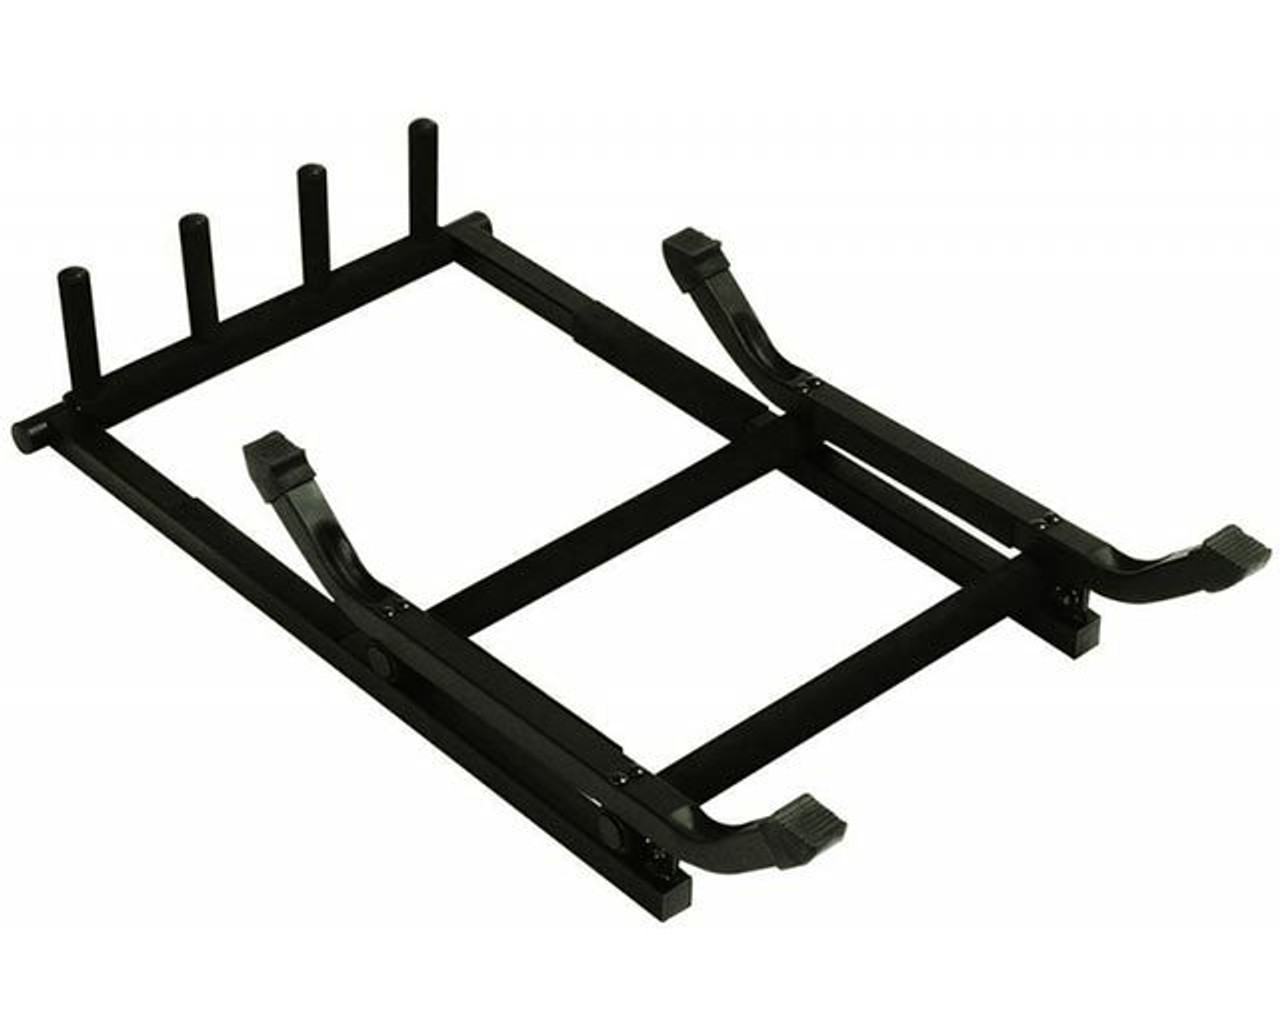 On Stage 3-Space Foldable Multi Guitar Rack